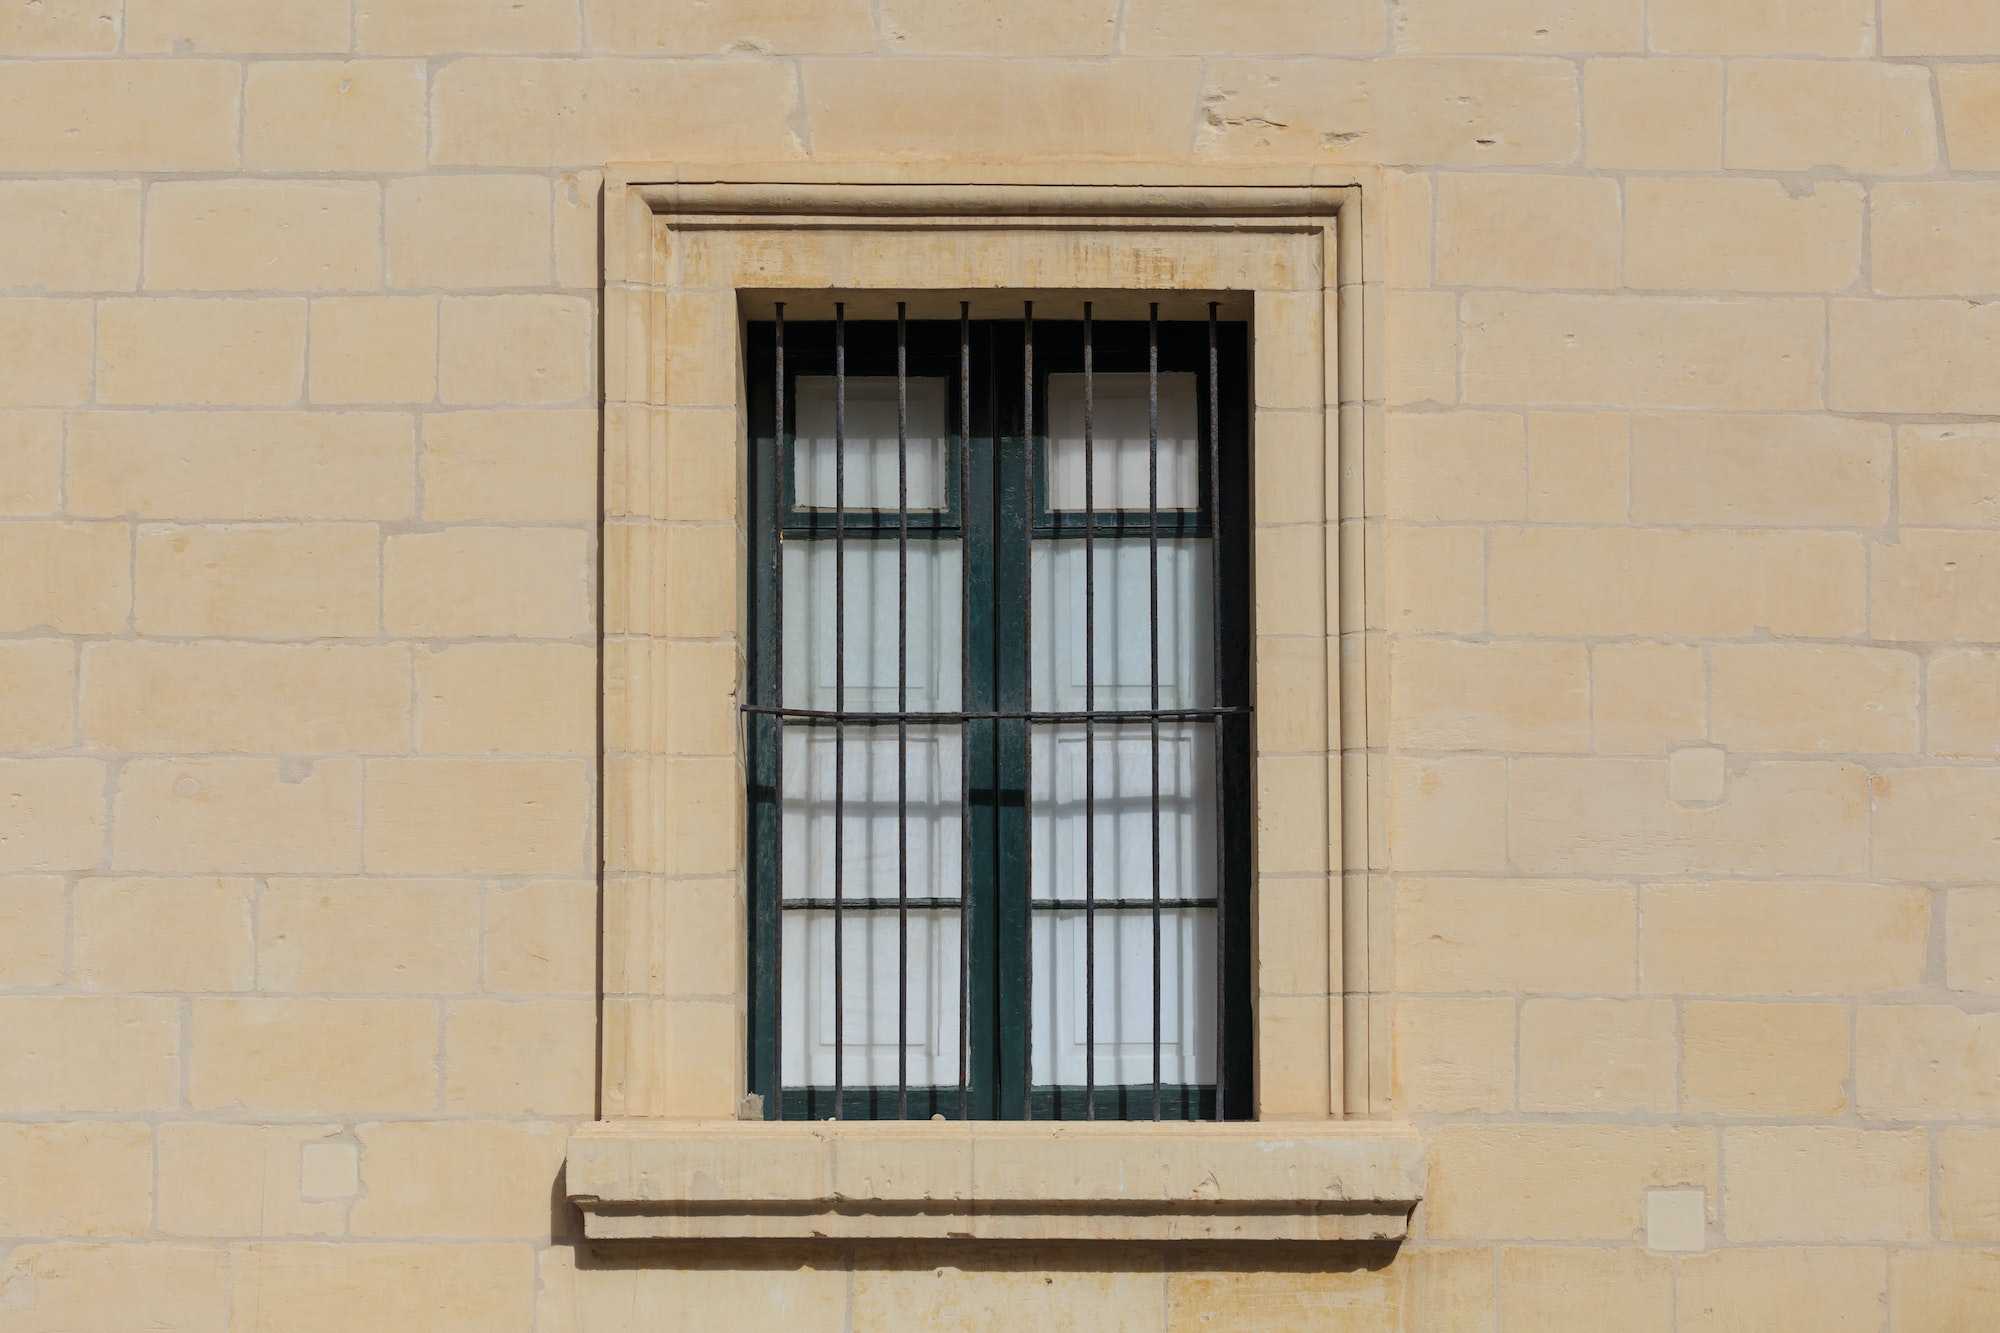 Malta, Valletta. Facade of yellow limestone house with closed window with metal bars